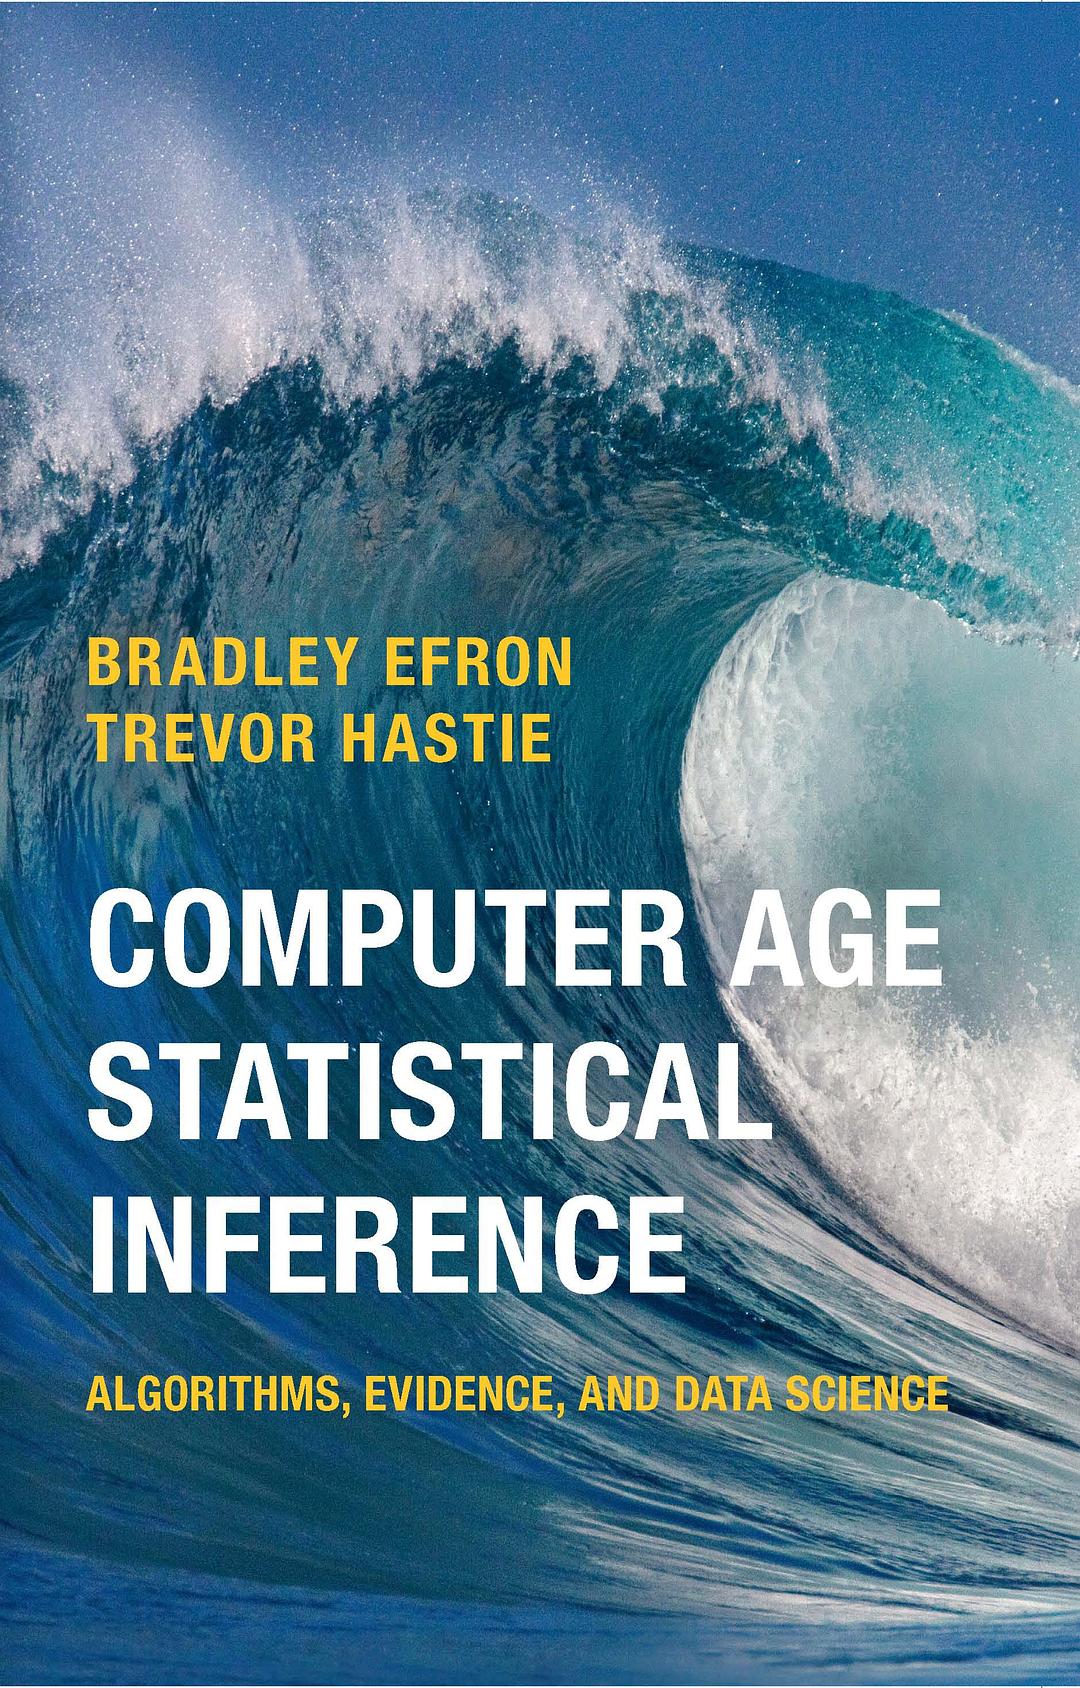 Computer Age Statistical Inference-好书天下